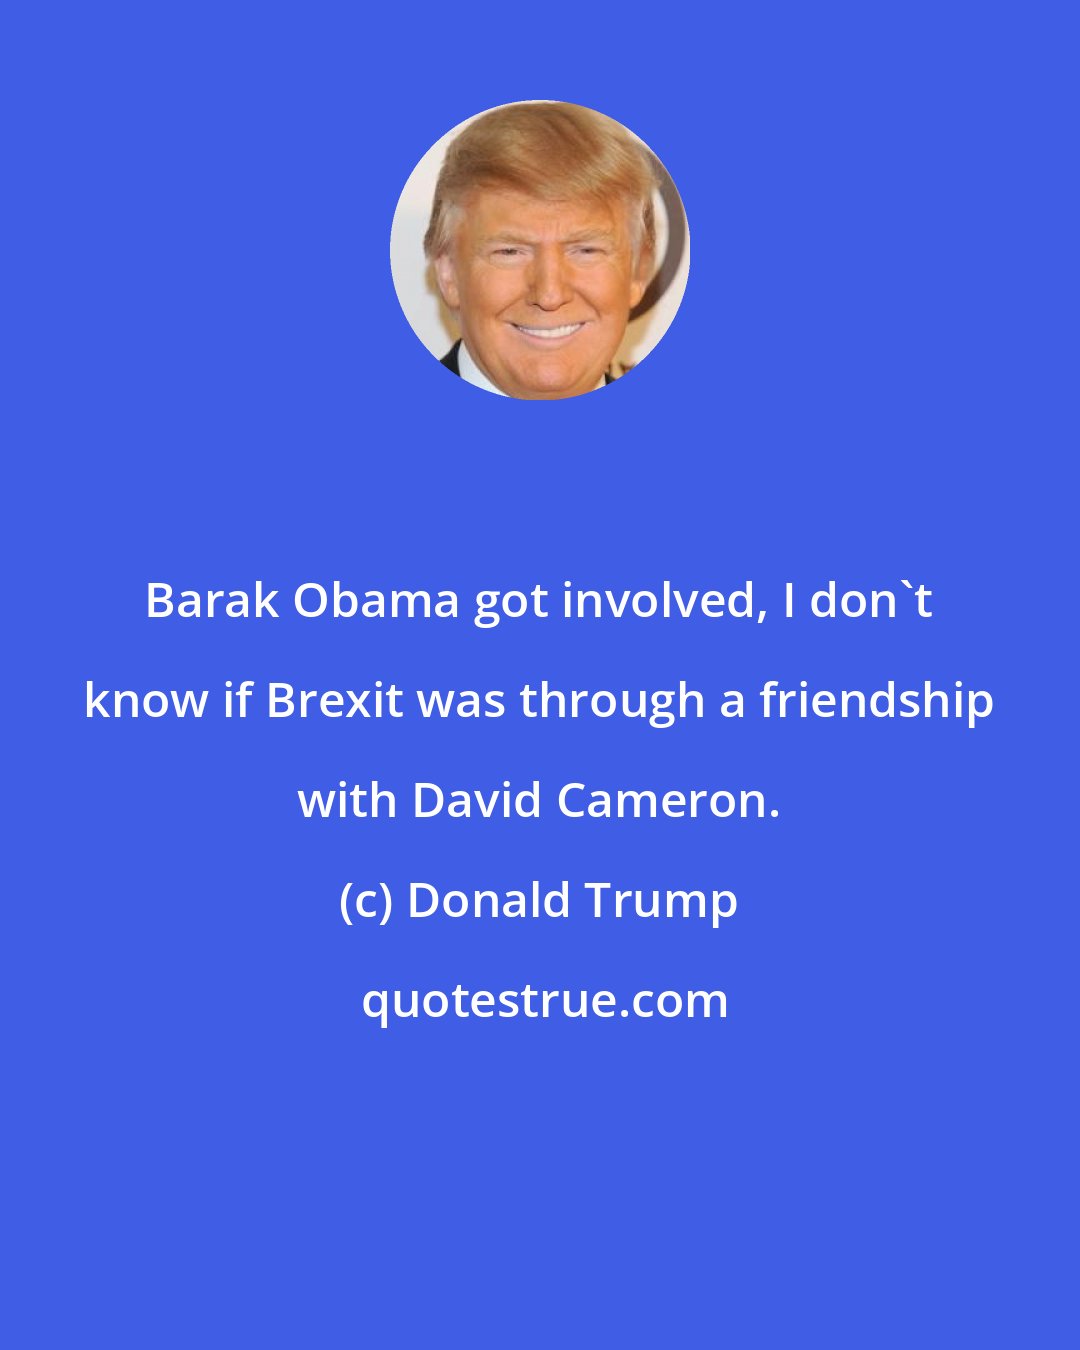 Donald Trump: Barak Obama got involved, I don't know if Brexit was through a friendship with David Cameron.